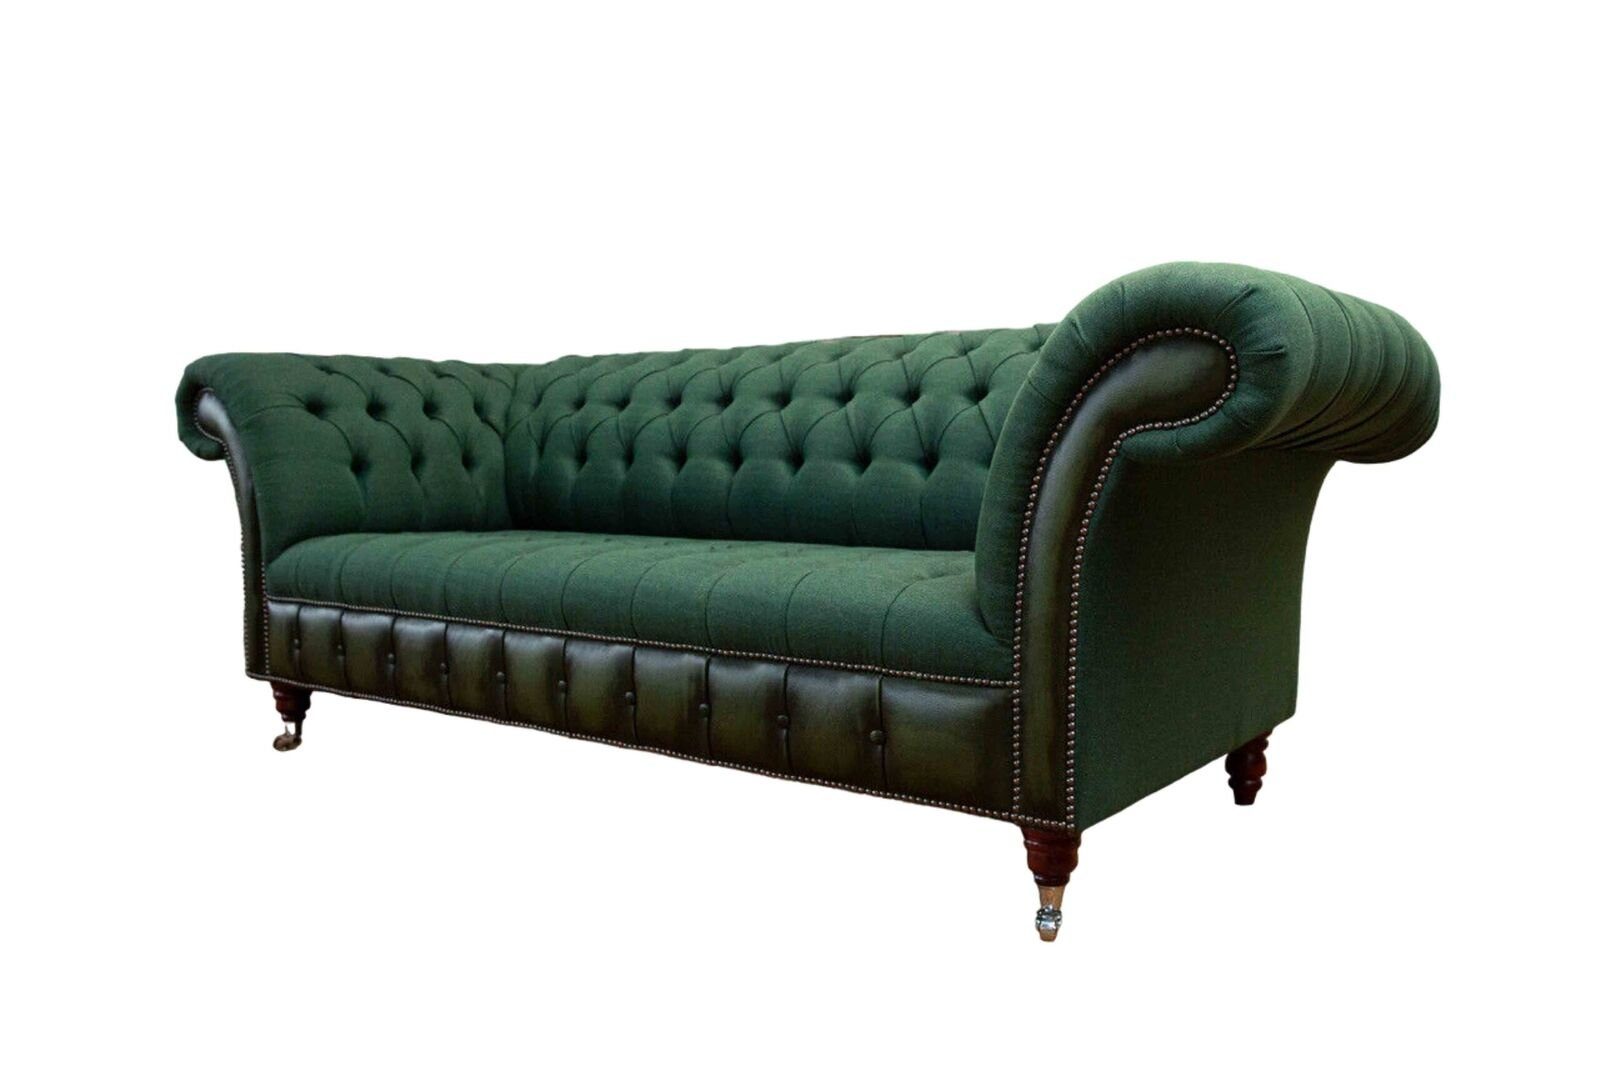 JVmoebel Sofa Grünes Chesterfield Sofa Europe Sitzer Couch Leder Stoff Couchen, Made Polster in 3